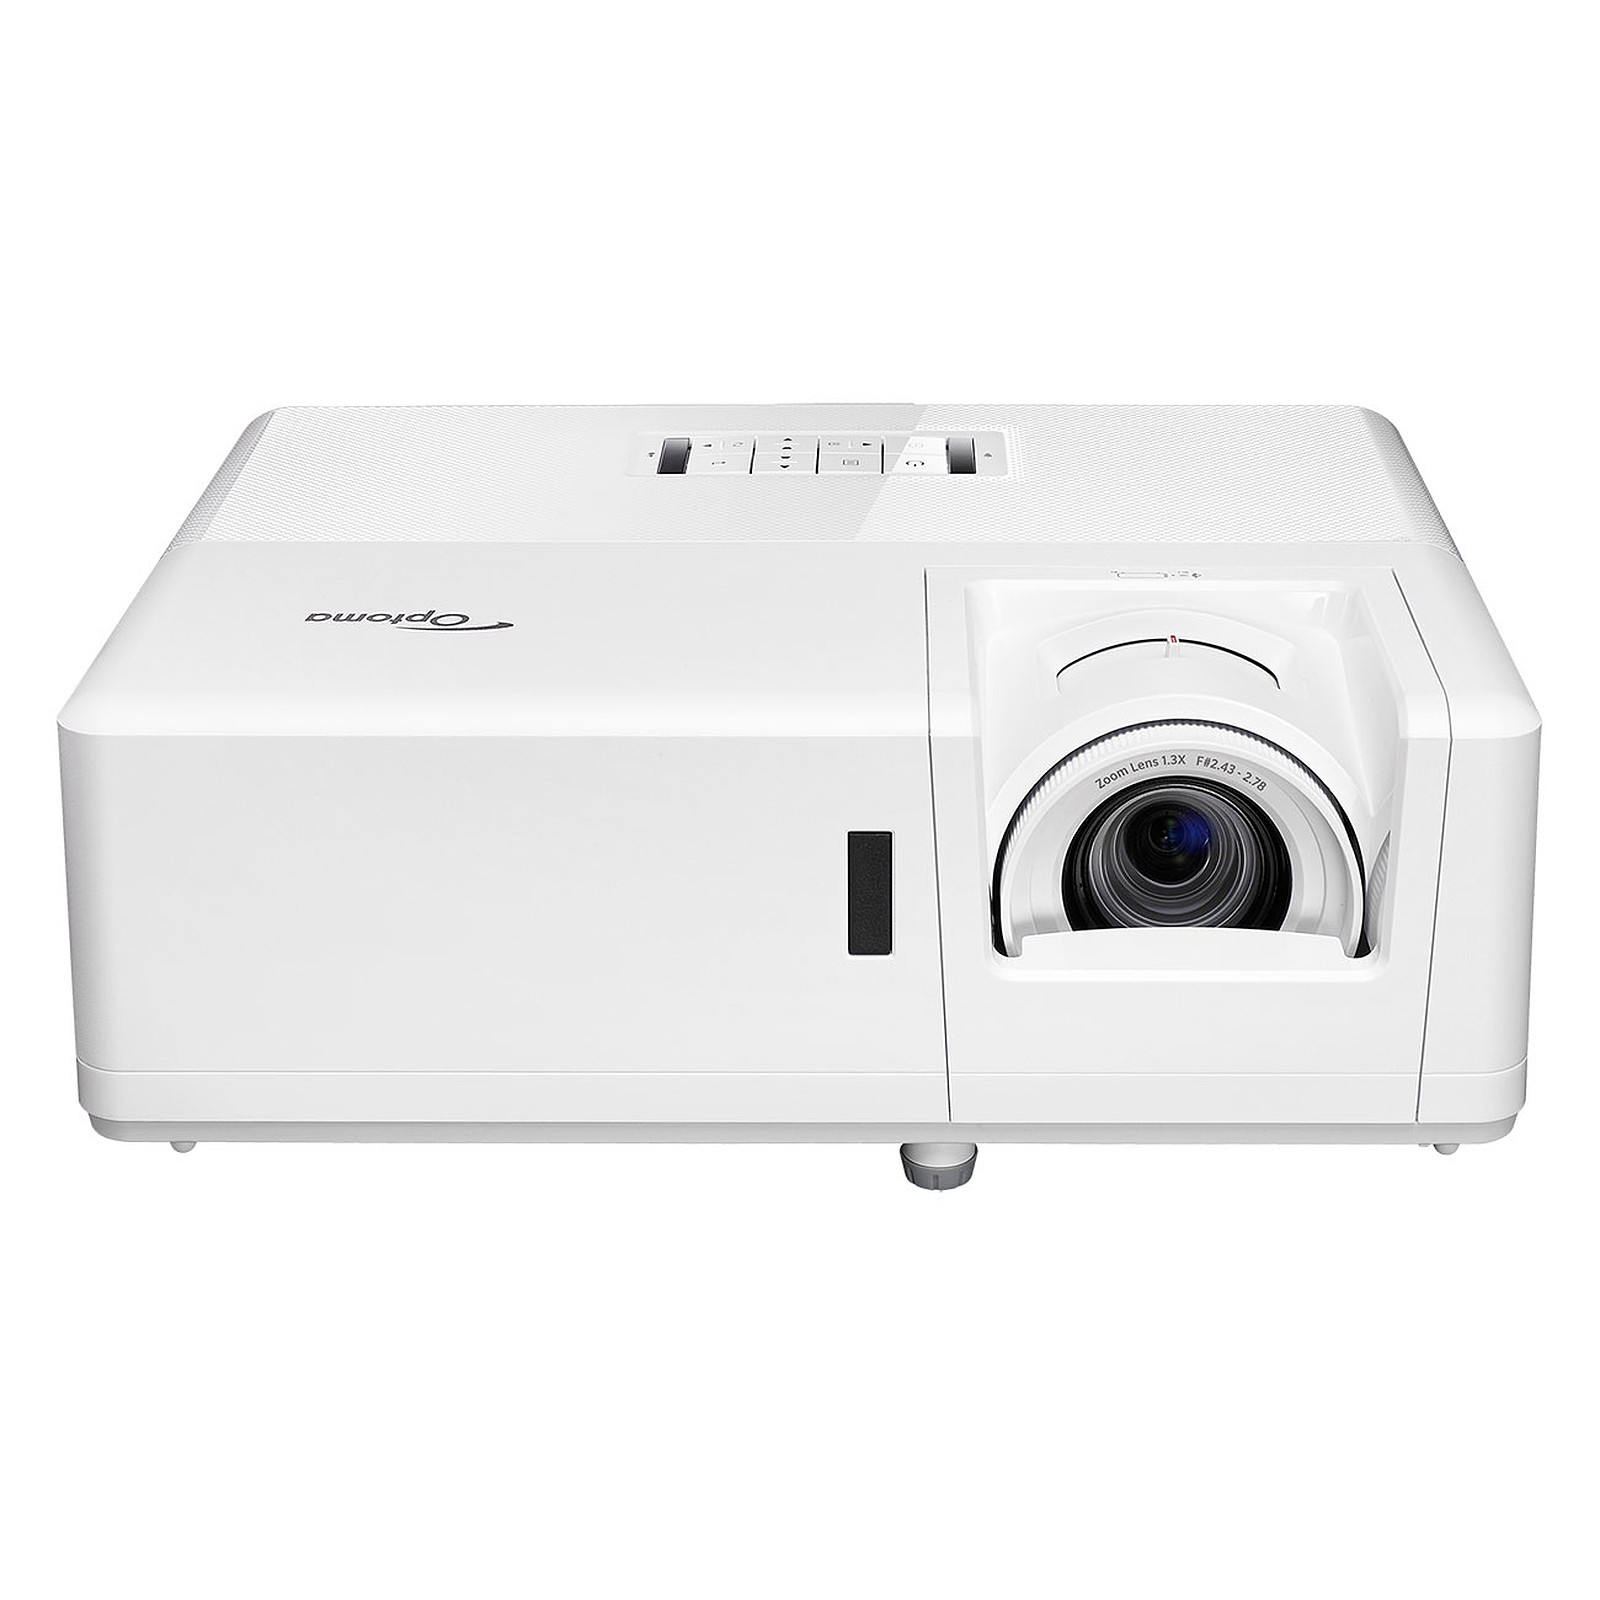 Optoma ZW400 - Videoprojecteur Optoma